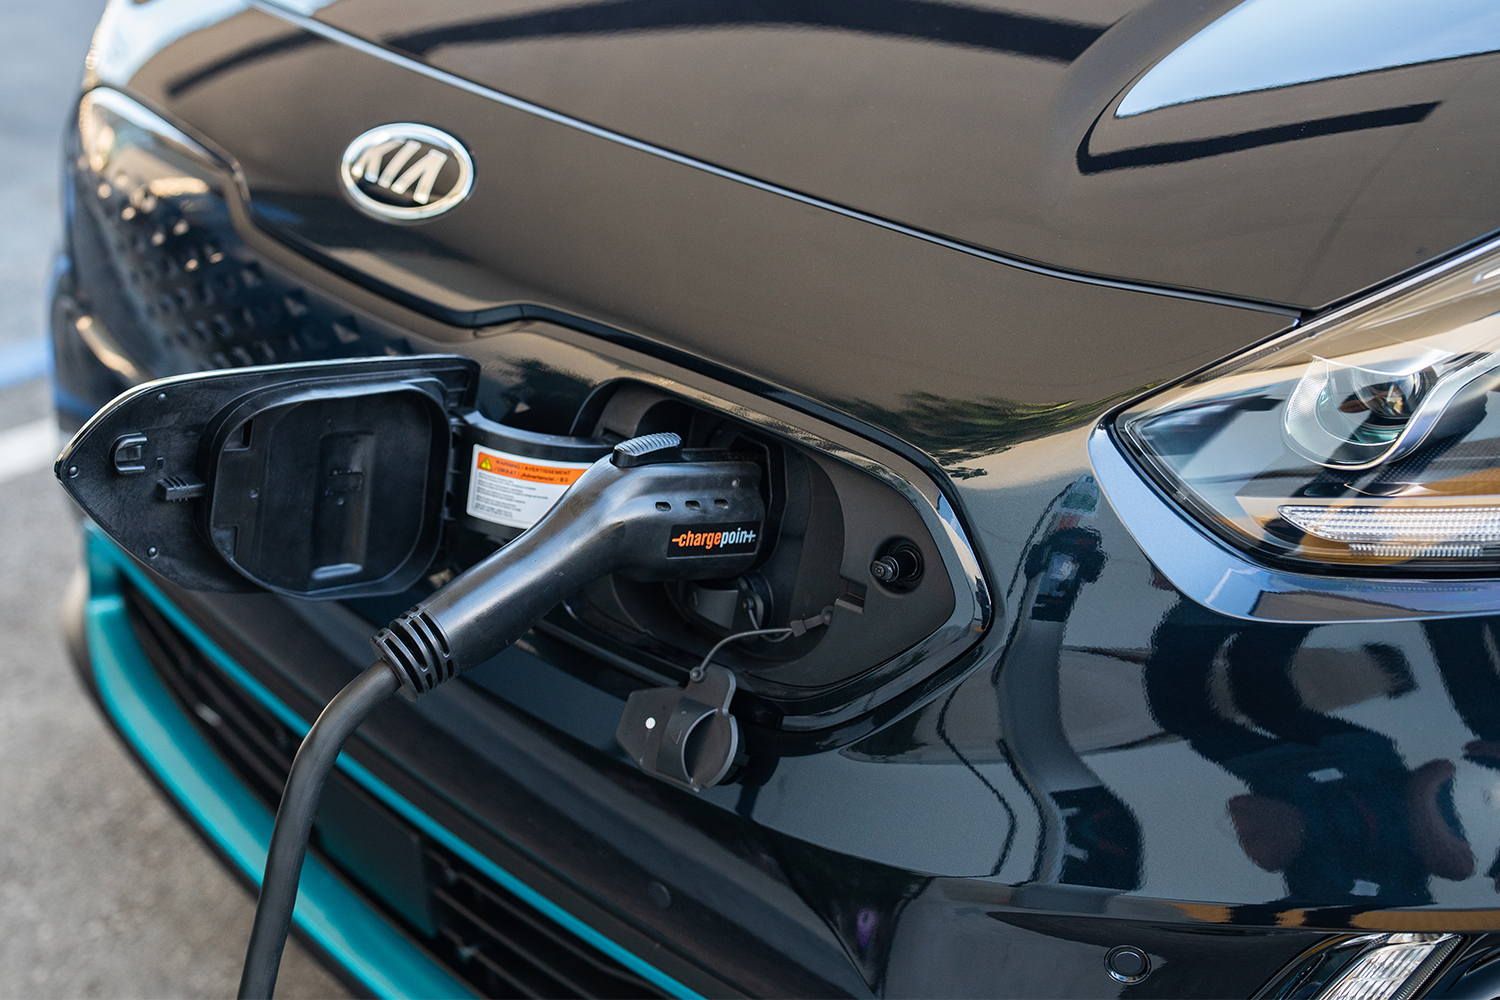 A ChargePoint electric car charger plugged into the front of the Kia Niro EV crossover